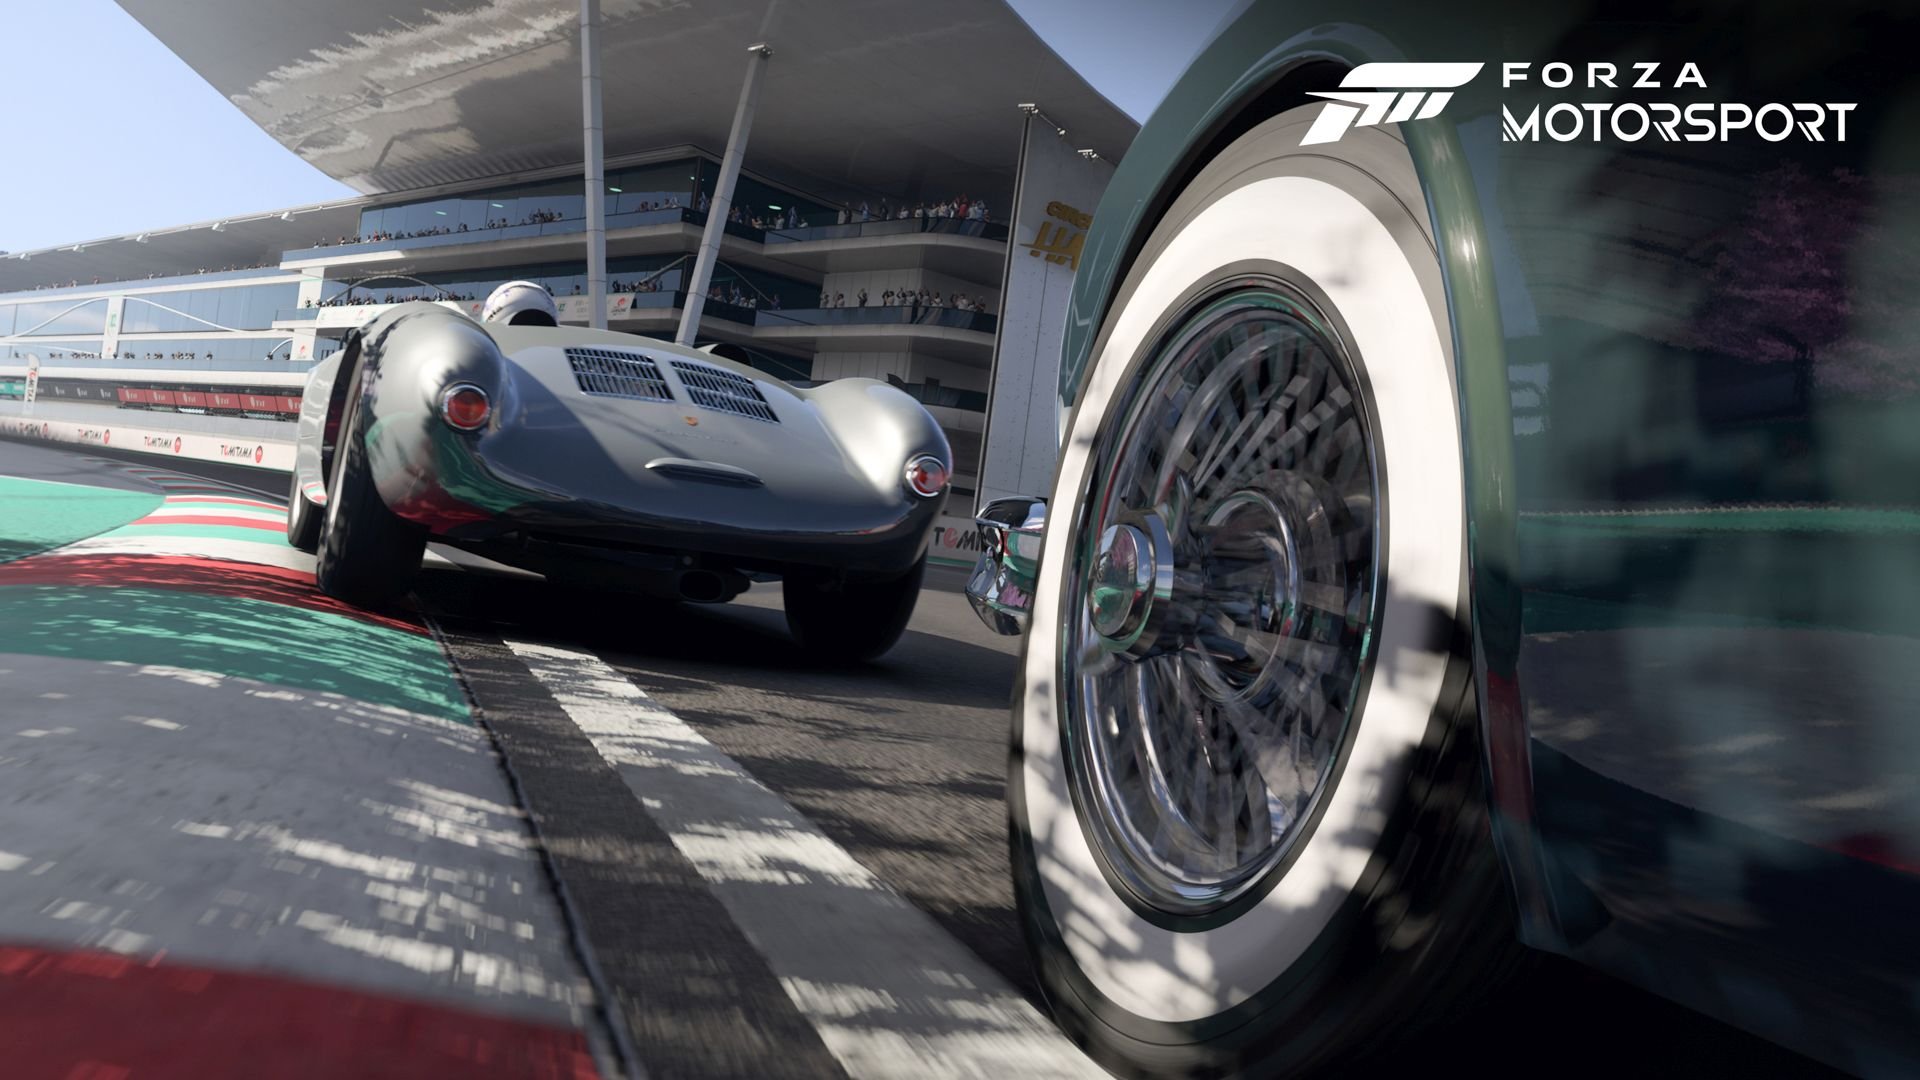 Forza Motorsport 8 release date, trailers, and gameplay